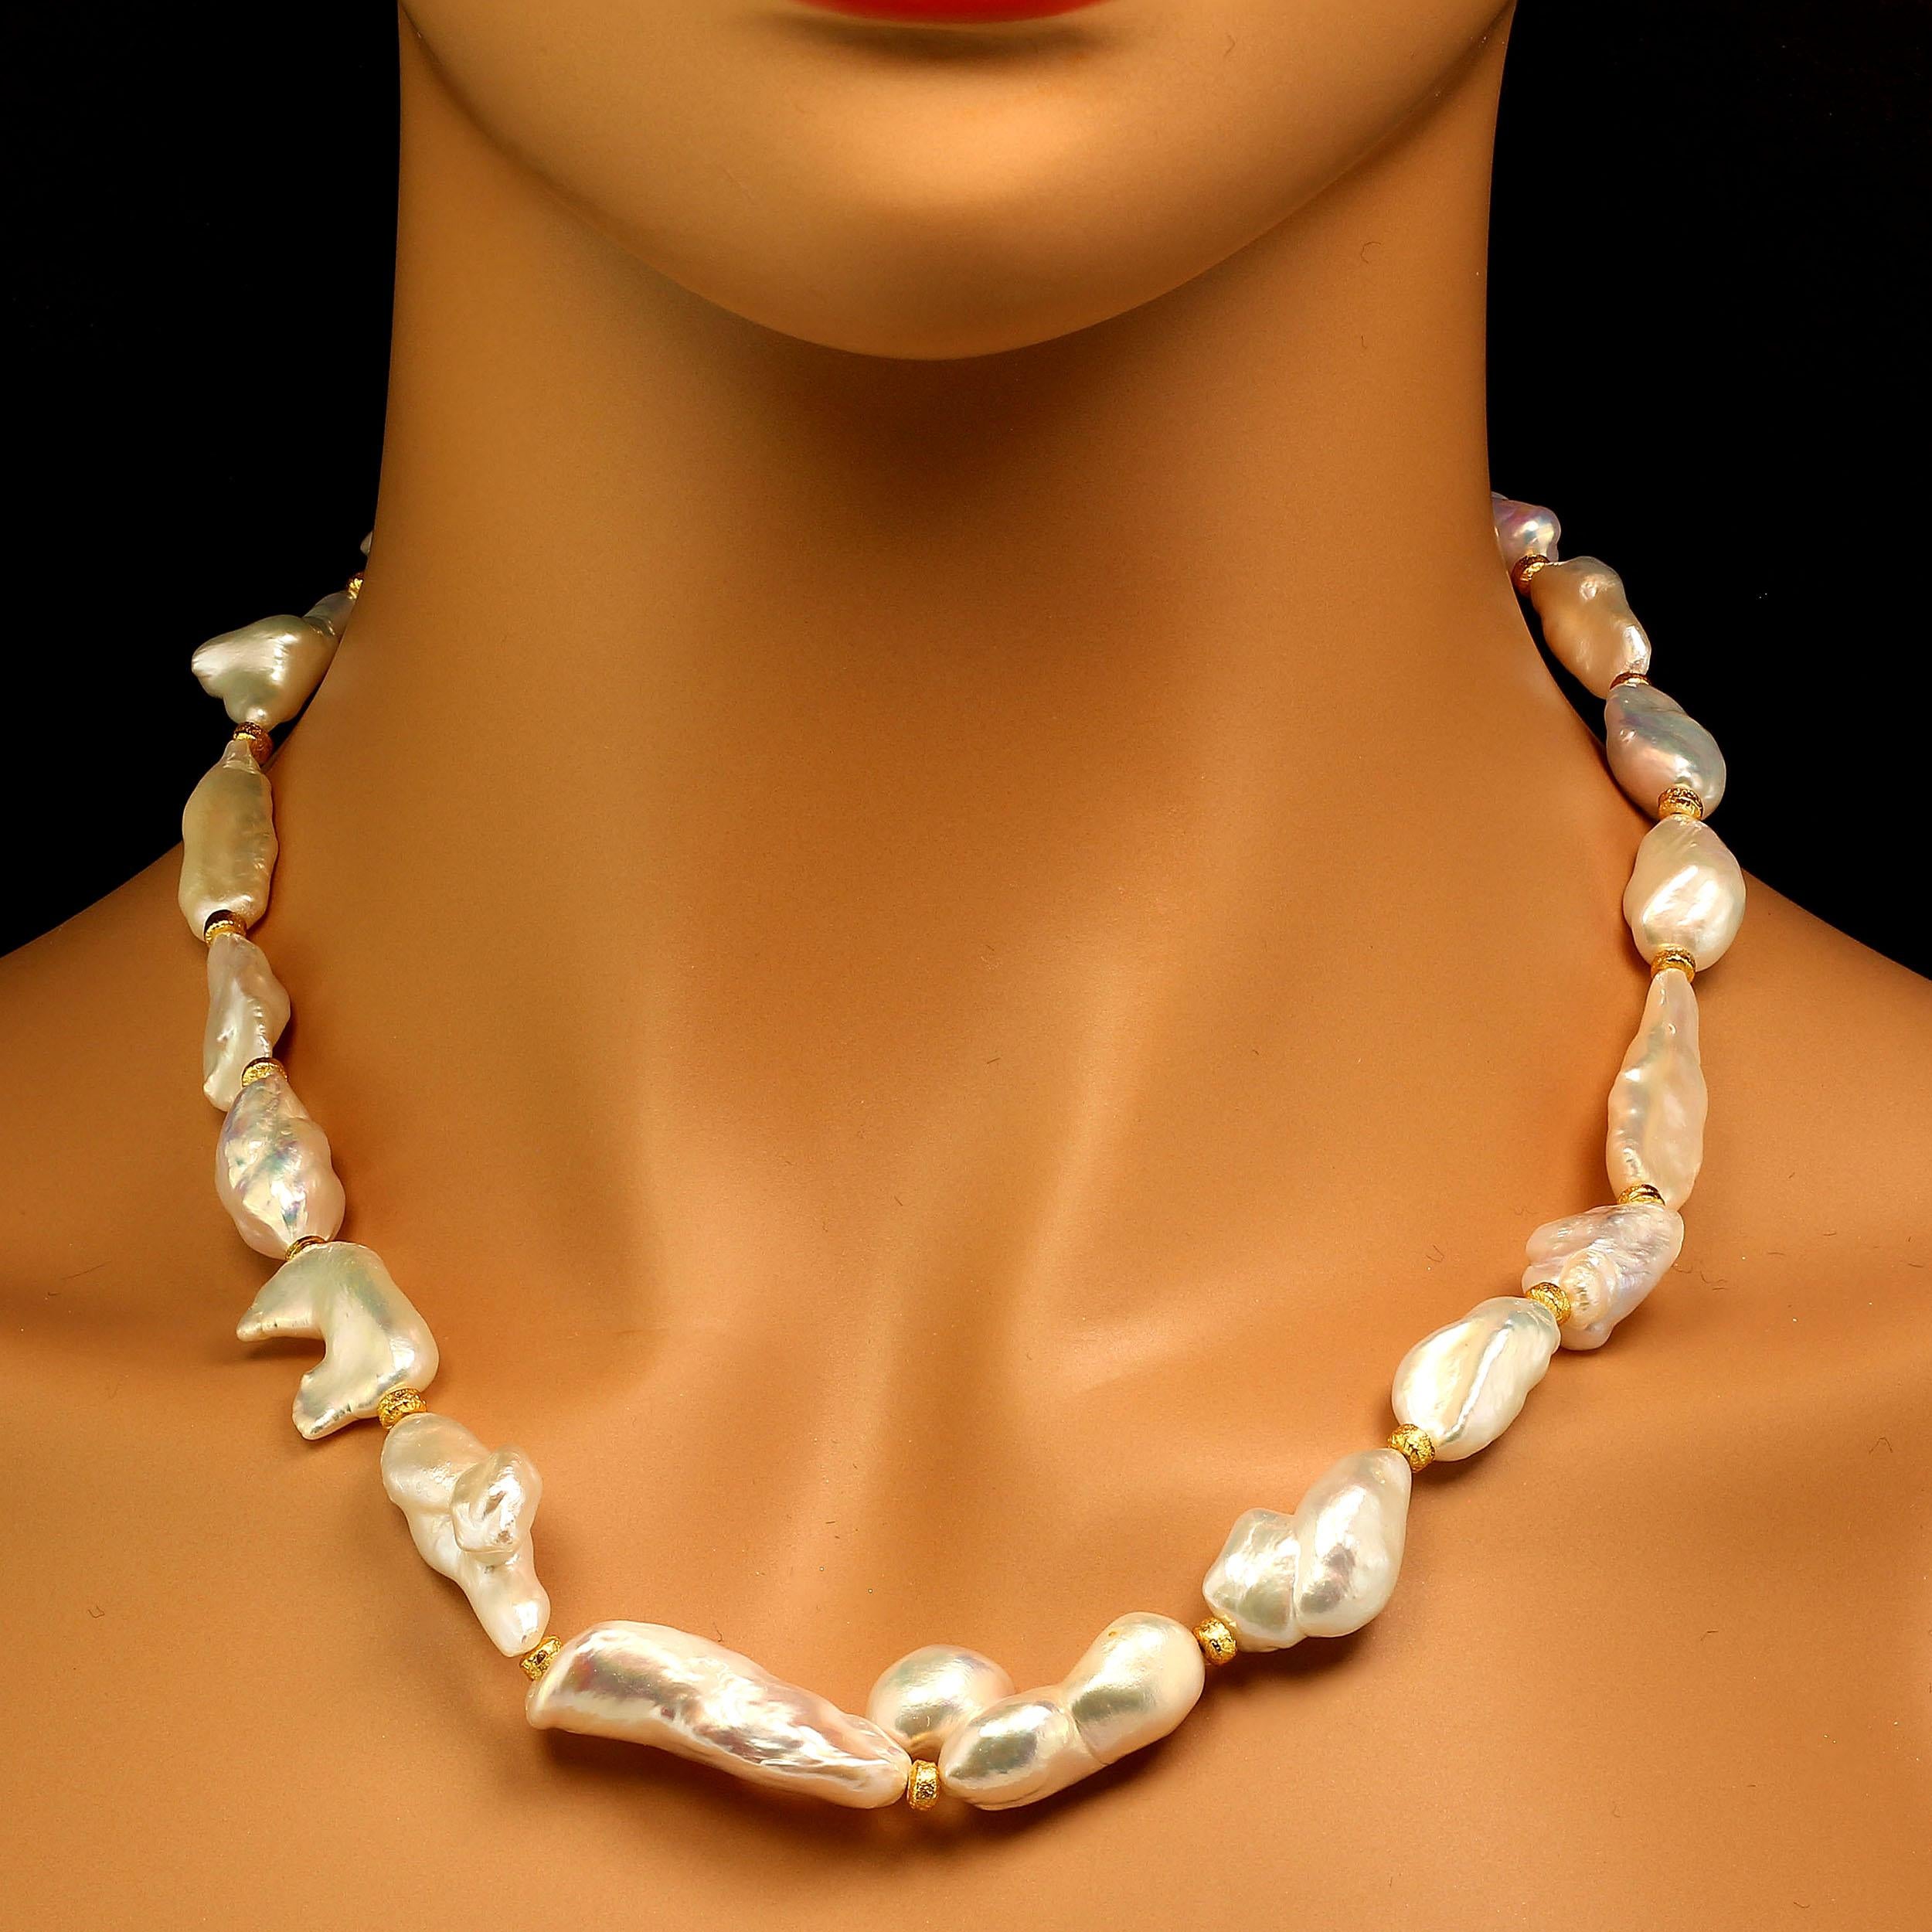 Bead AJD White Glowing Freshwater Pearl 20 Inch Necklace  June birthstone